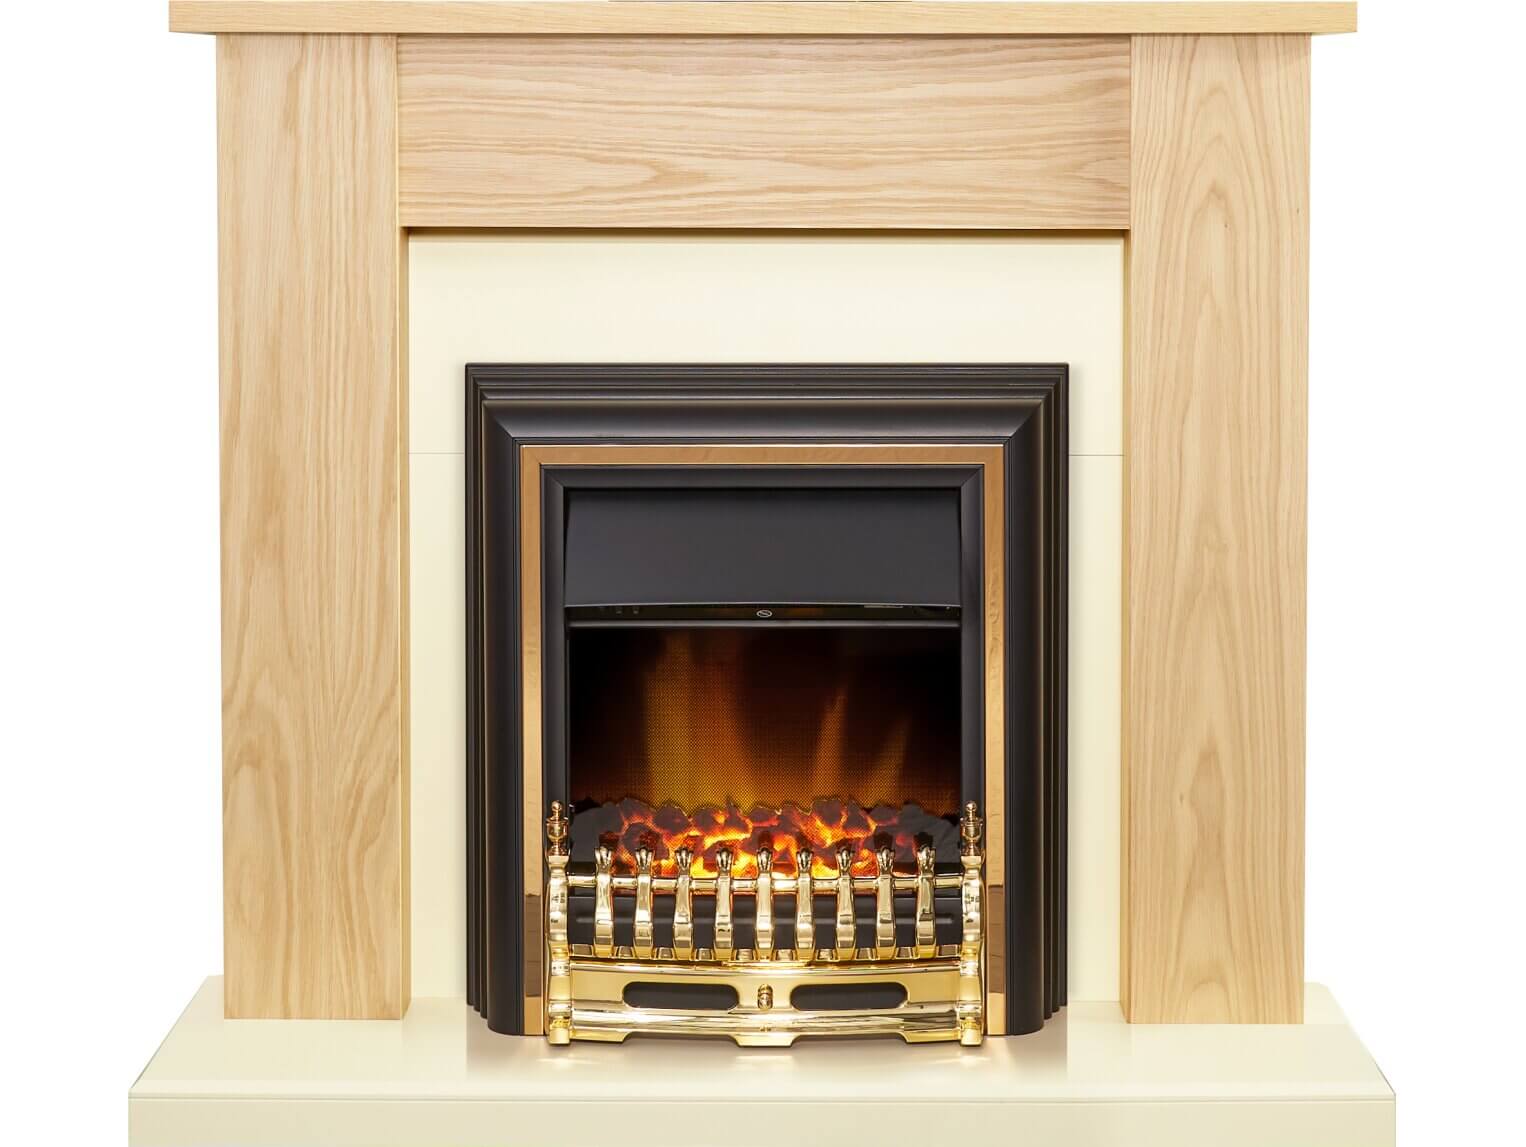 Adam New England Fireplace in Oak & Cream with Durham Electric Fire in Brass - Glowing Flames